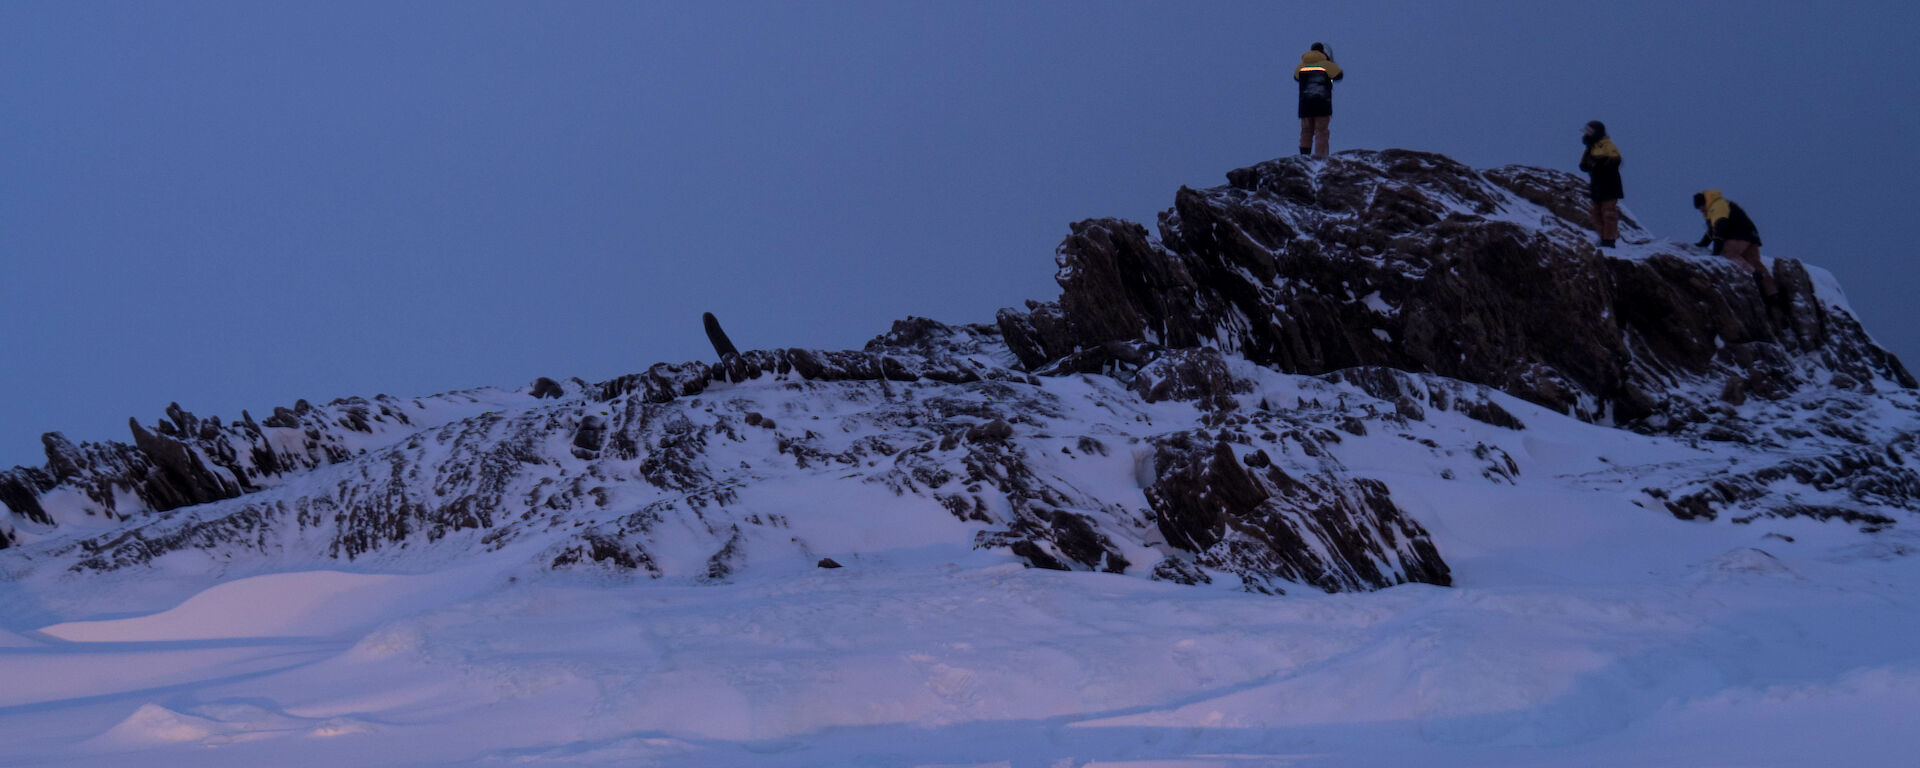 Three expeditioners standing on top a small rocky hill which is surrounded by sea ice and snow.